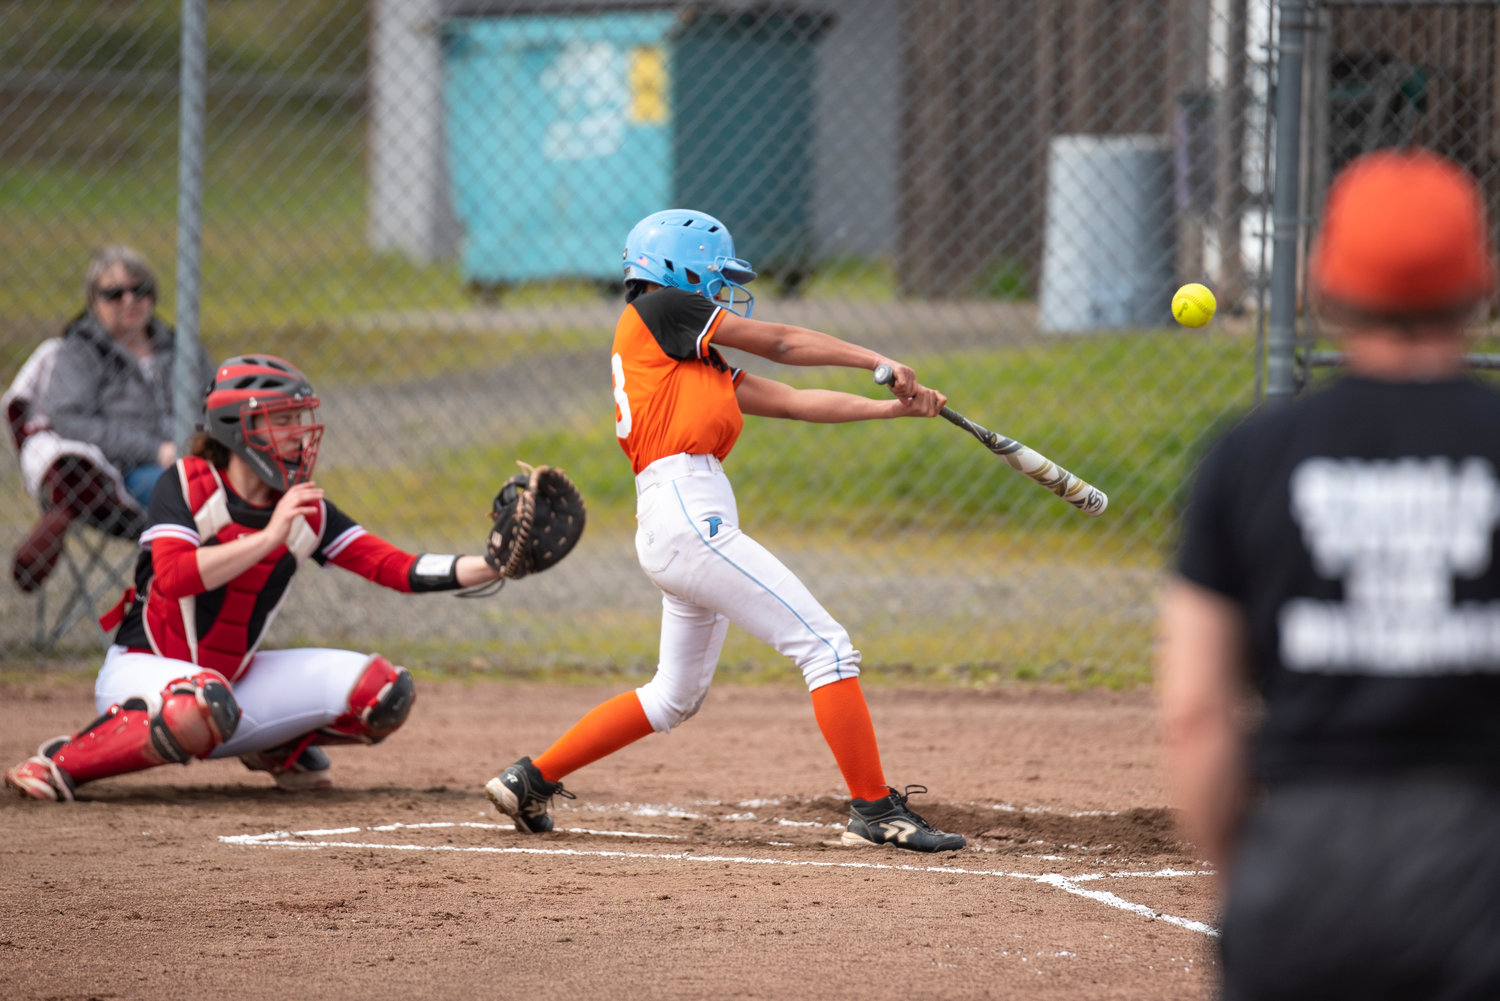 Rainier's Madison Mounts connects on a Toledo pitch during a road game on April 25.